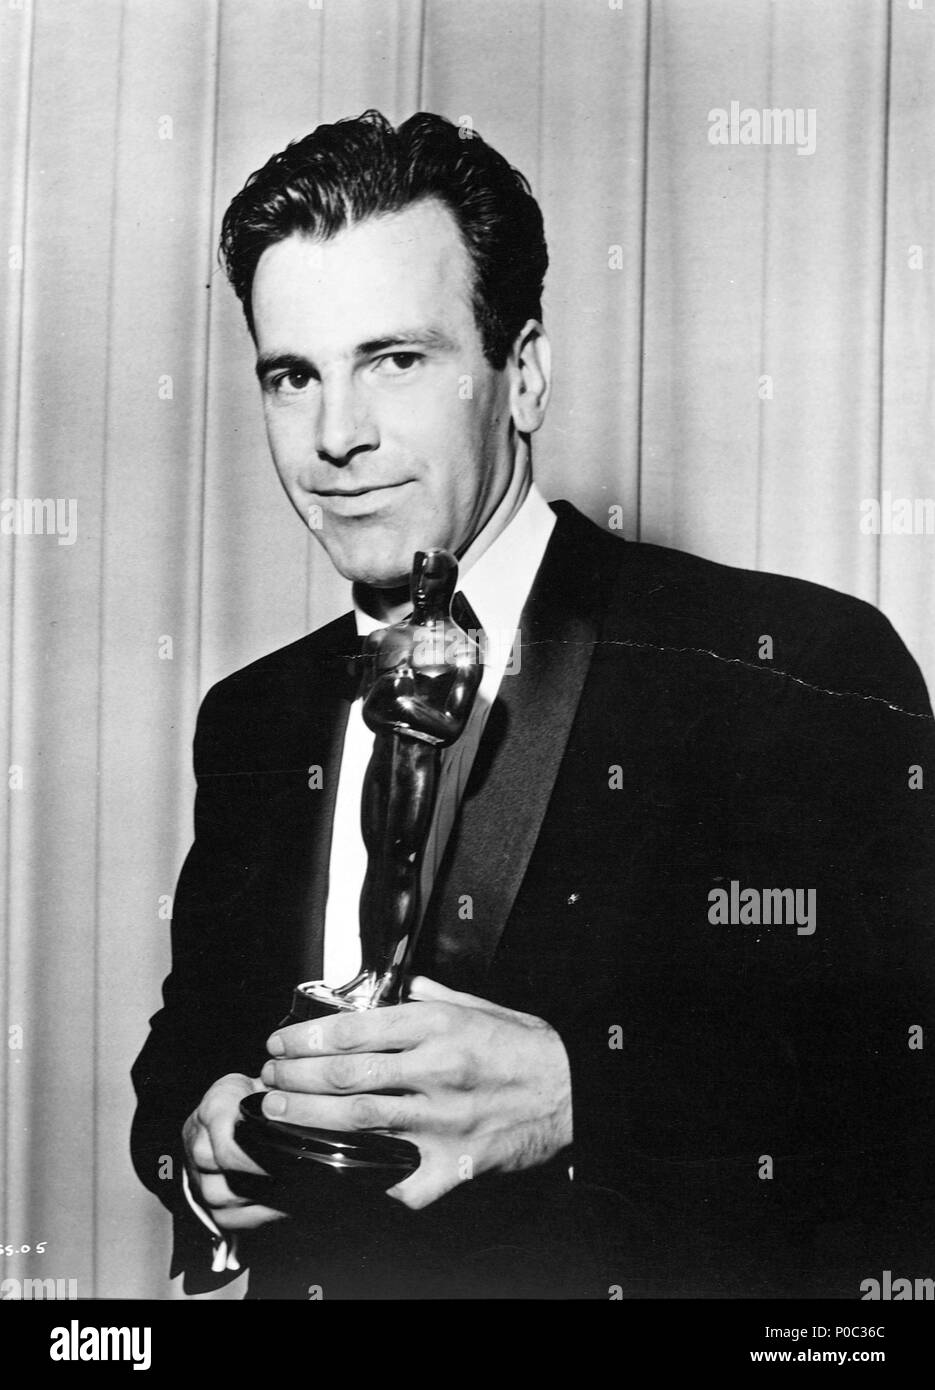 Description: 34th Academy Awards (1962). Maximilian Schell, best actor for 'Judgment at Nuremberg'..  Year: 1962.  Stars: MAXIMILIAN SCHELL. Stock Photo